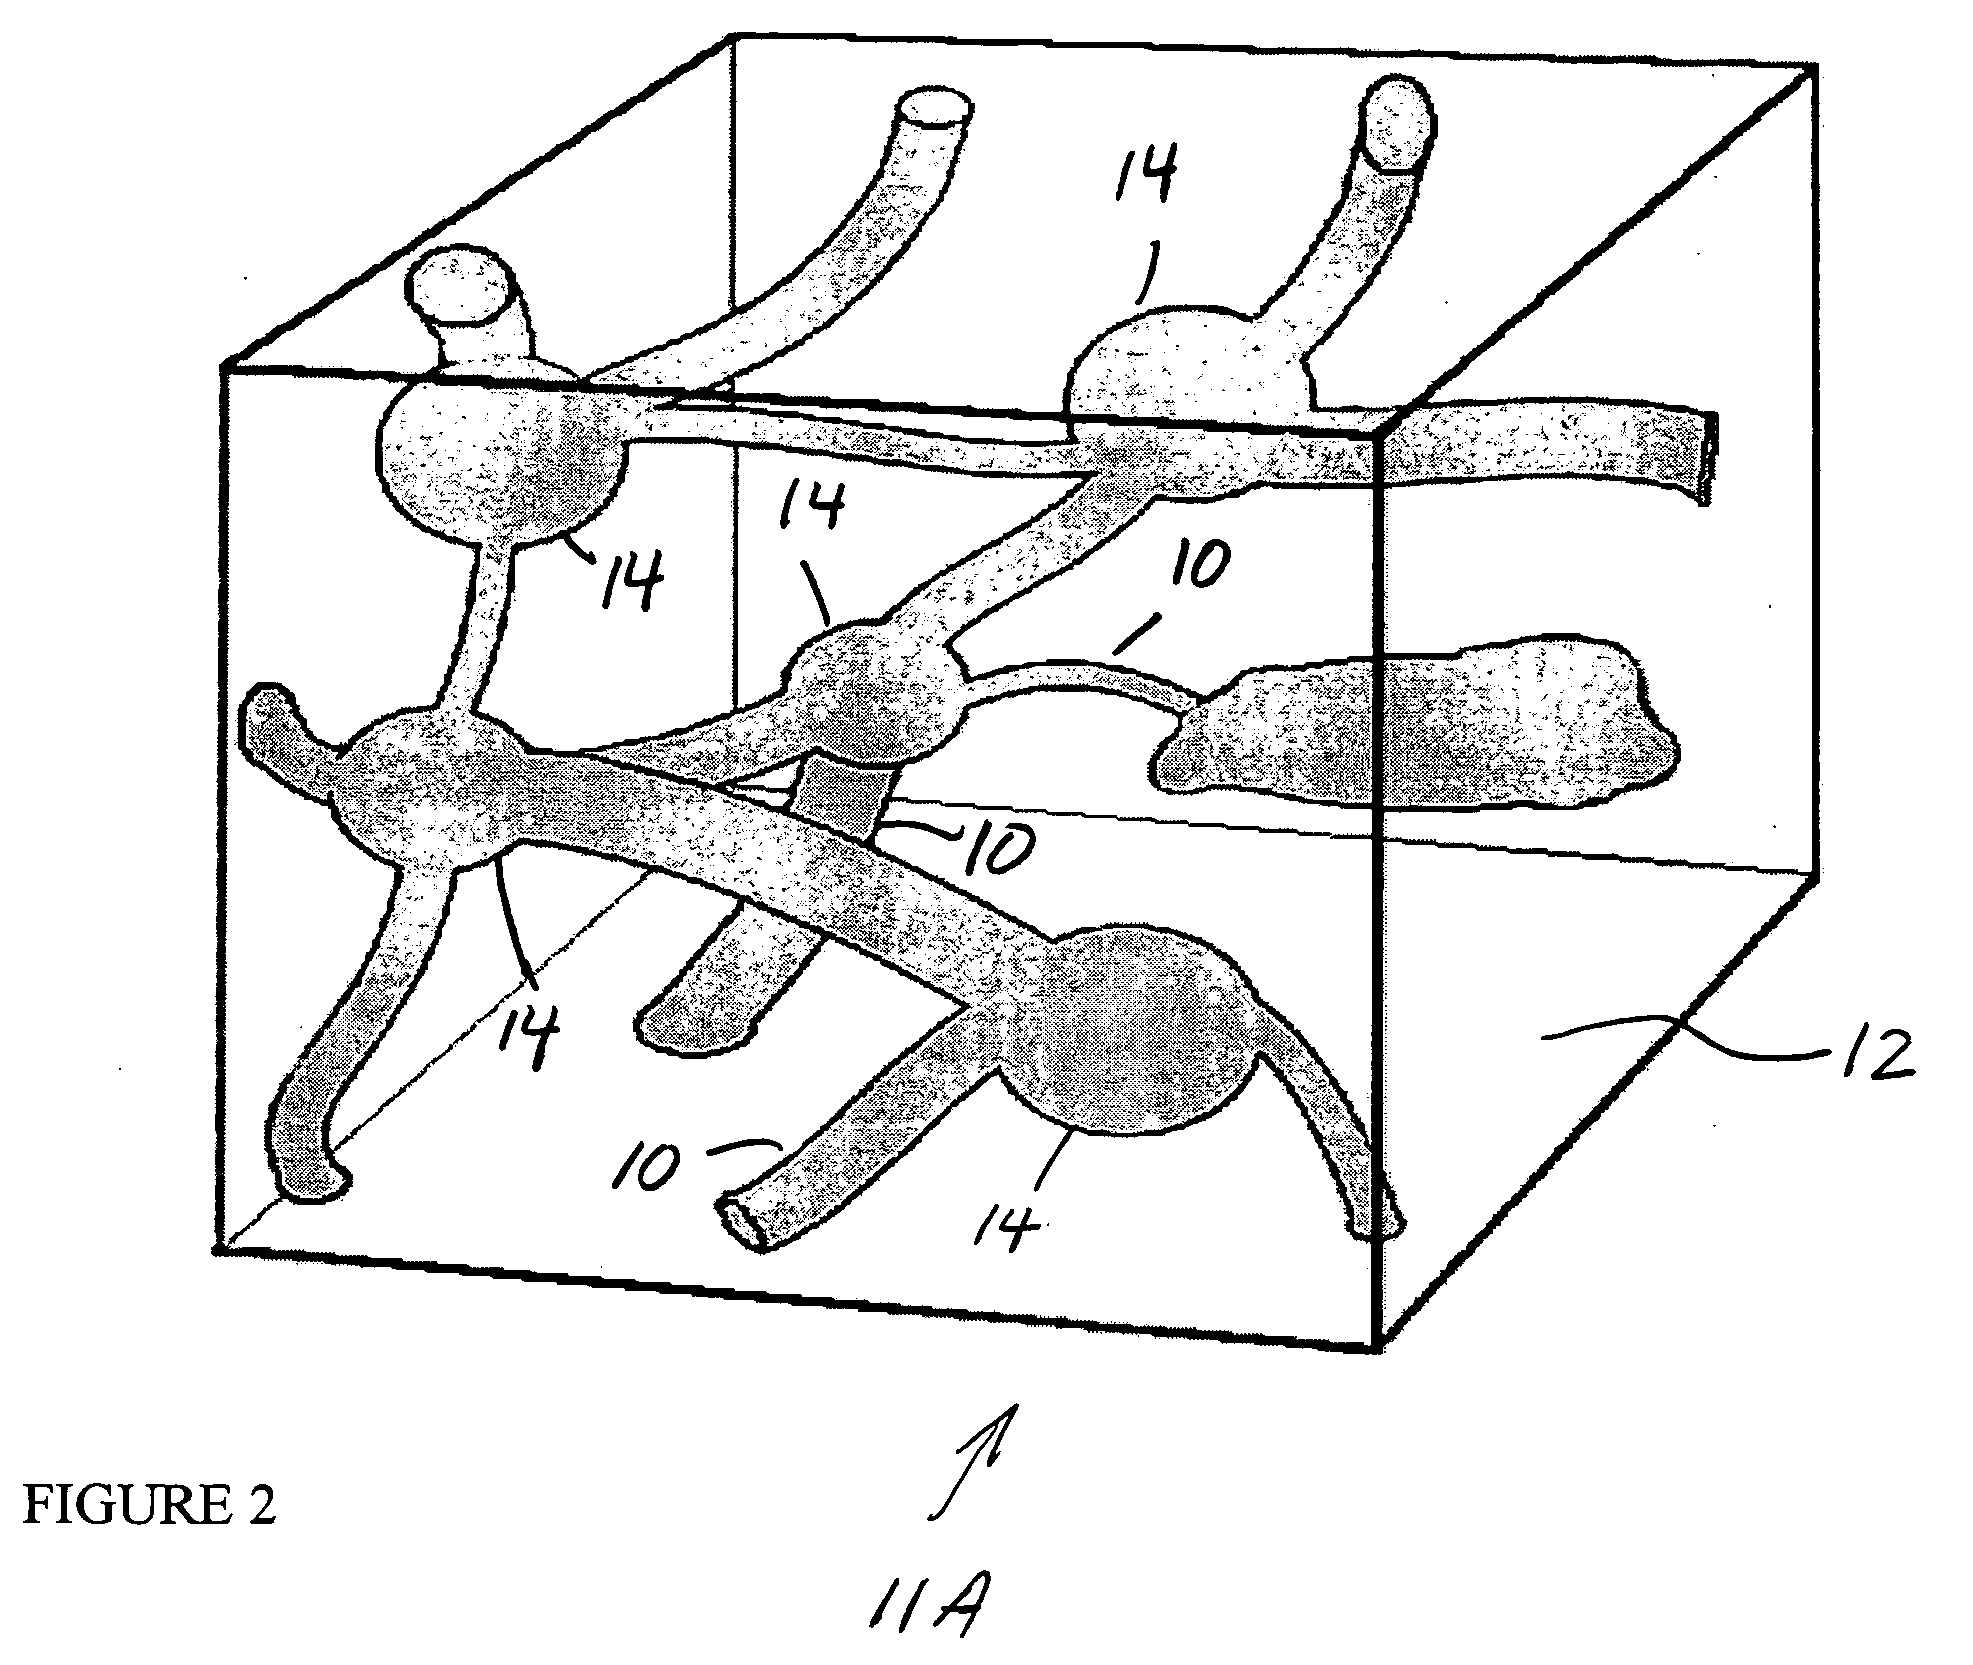 Method for estimating pore structure of porous materials and its application to determining physical properties of the materials